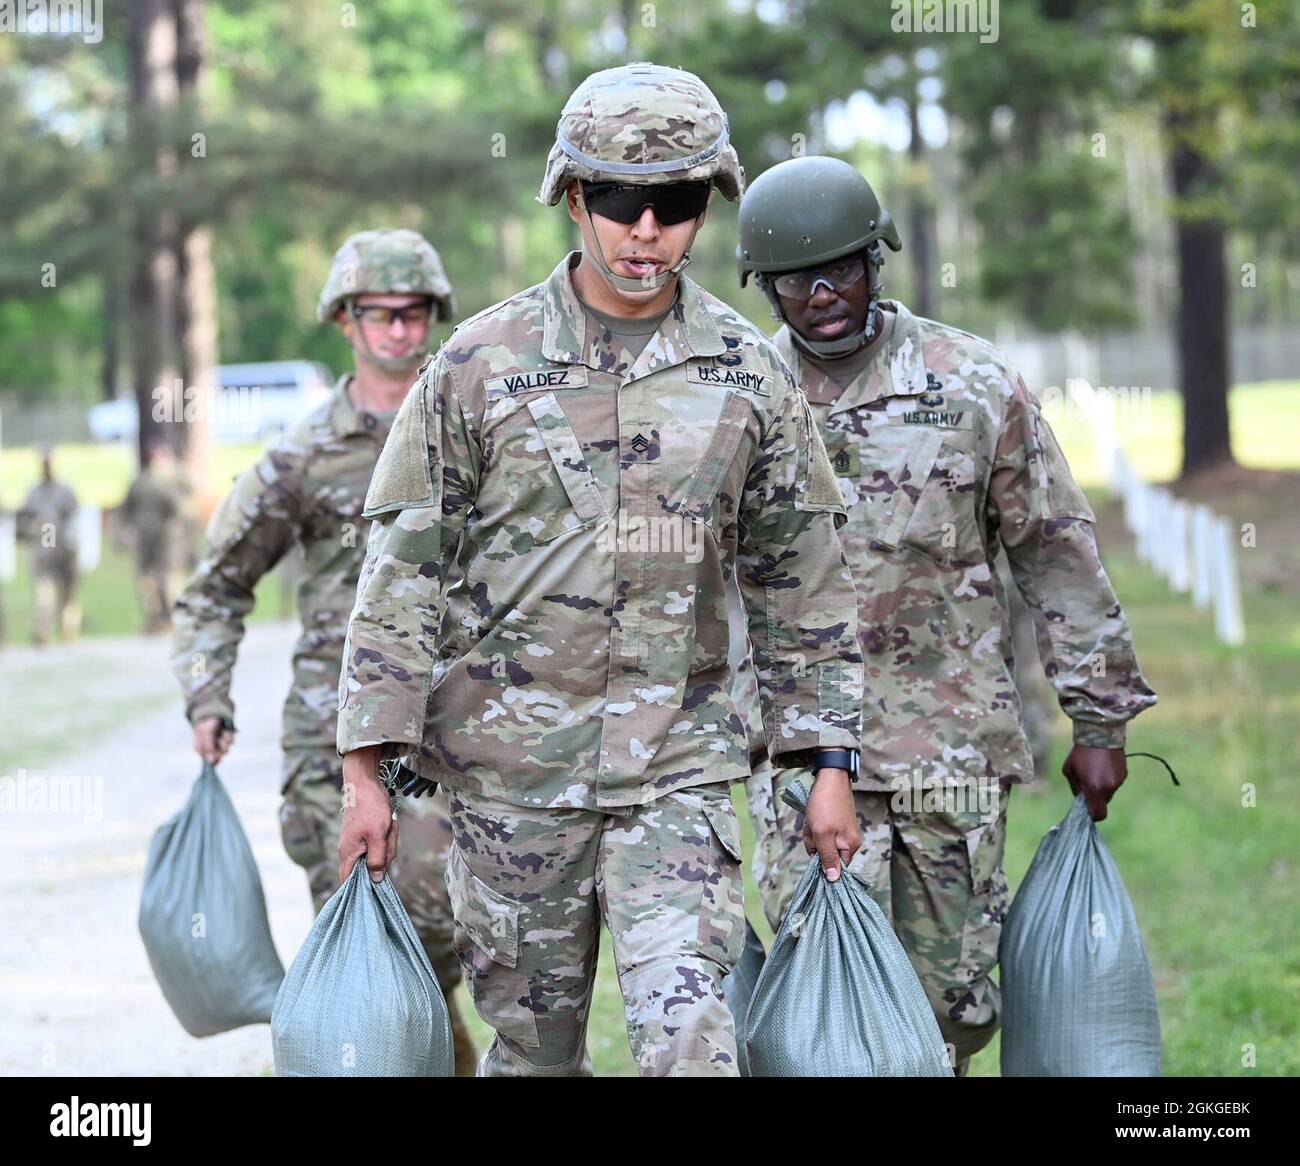 Soldiers from Support Battalion, 1st Special Warfare Training Group (Airborne) carry sandbags as part of a stress-shoot during the battalion's Commander's Cup competition at Fort Bragg, North Carolina April 15, 2021. The Soldiers from each company competed in a ruck march, obstacle course, land navigation, Jeopardy-themed trivia contest and stress shoot with pistols and rifles. Stock Photo